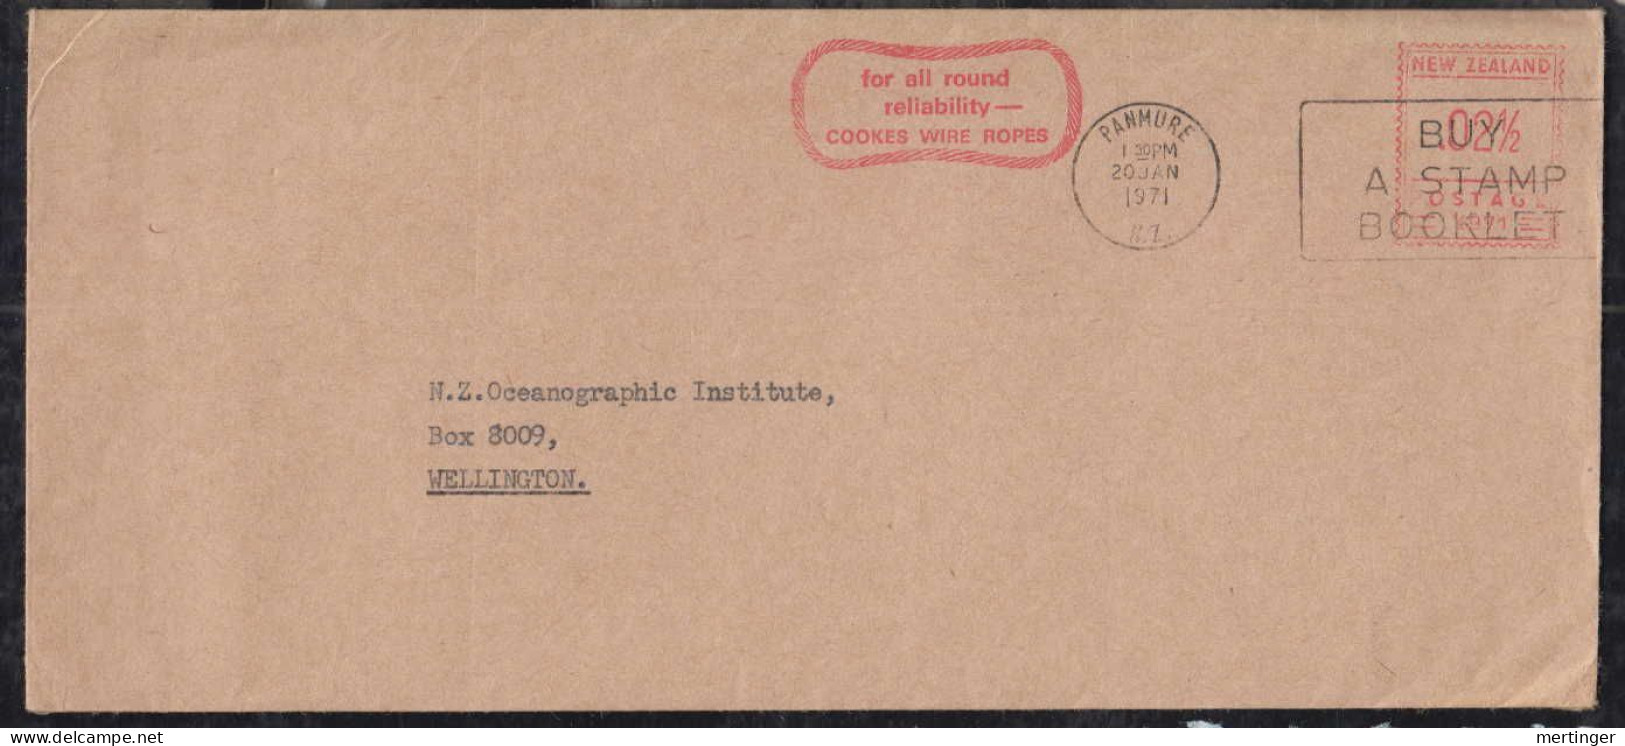 New Zealand 1971 Meter Cover 3c PANMURE To WELLINGTON Cookes Wire Ropes - Covers & Documents